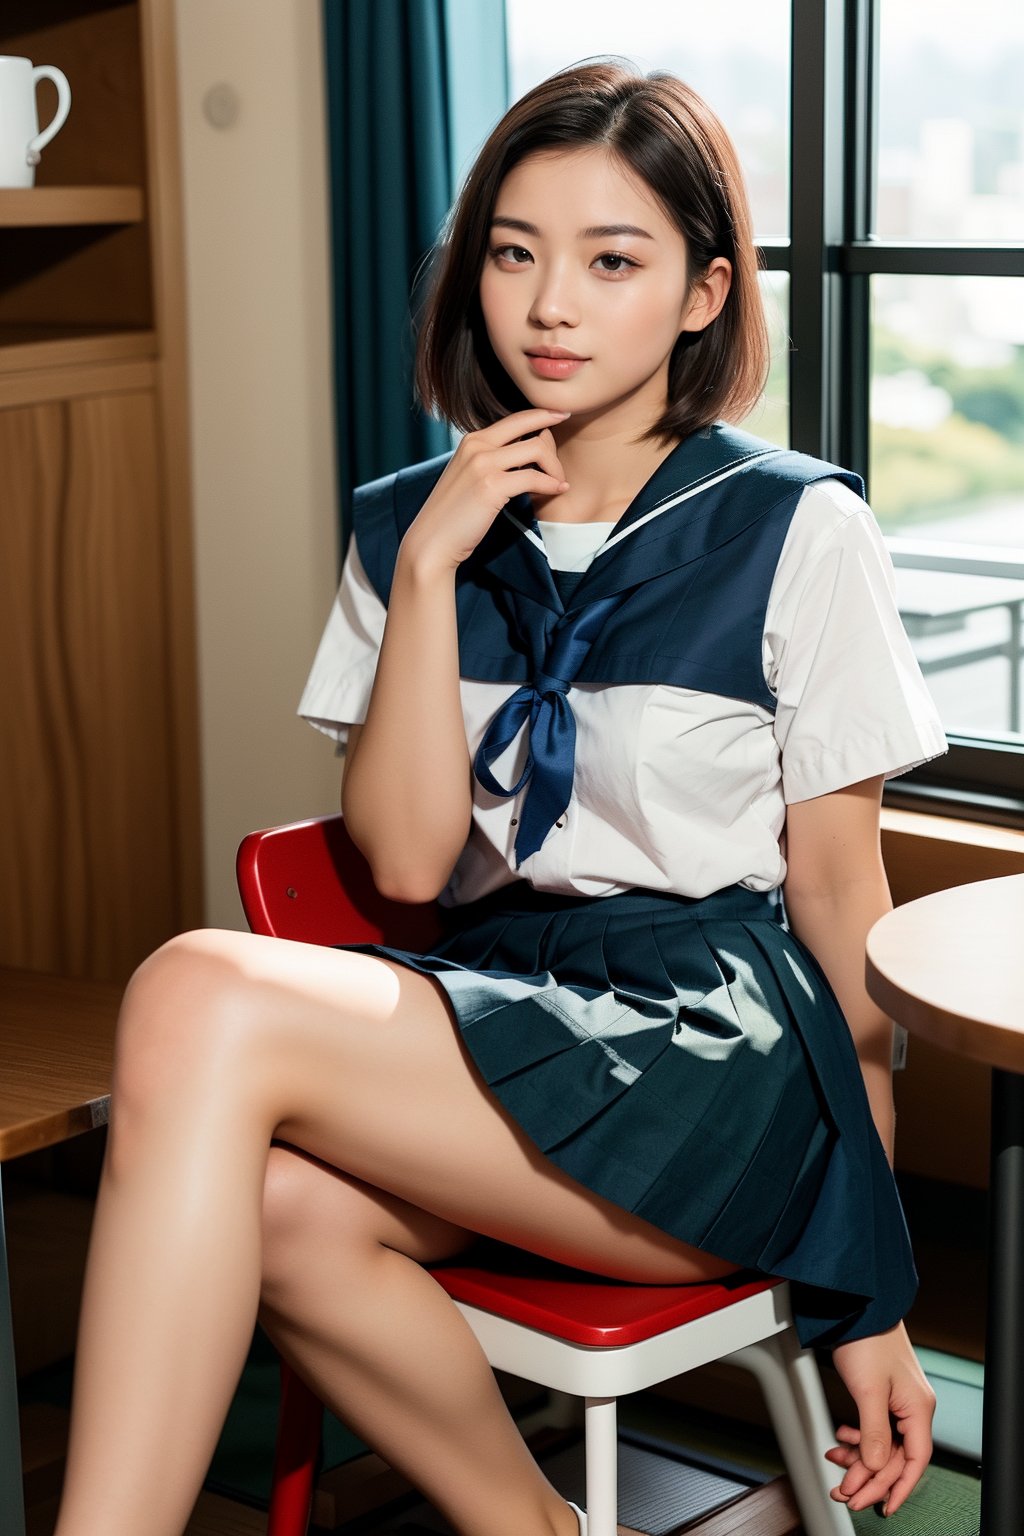 1 girl , taiwanese,  25_years old ,Asia, senior hight school,   {{short_hair the ends are cut around chin length}}, Sailor suit uniform, skirt, {{4K_quality}}, ((japanese_JK_uniform)), Extremely Realistic, smaller head,studentofMisery, Fujifilm_camera , Aperture _F1.4, XF56mmF1.4 ,full-body shot, Bokeh, IG: iwakura shiori, stockings,canvas shoes, seat on the chair, {{window next to starbucks}}, Backlight, sideways ,{{ silhouette}}, indoor only sun light,time is 3P.M.{{Half-body close-up}}, facing forward, turning head to look like a camera, No light indoors, light only form windows,Hands on the table, one hand resting on the chin, coffee cup on the table, film_style, cross her legs